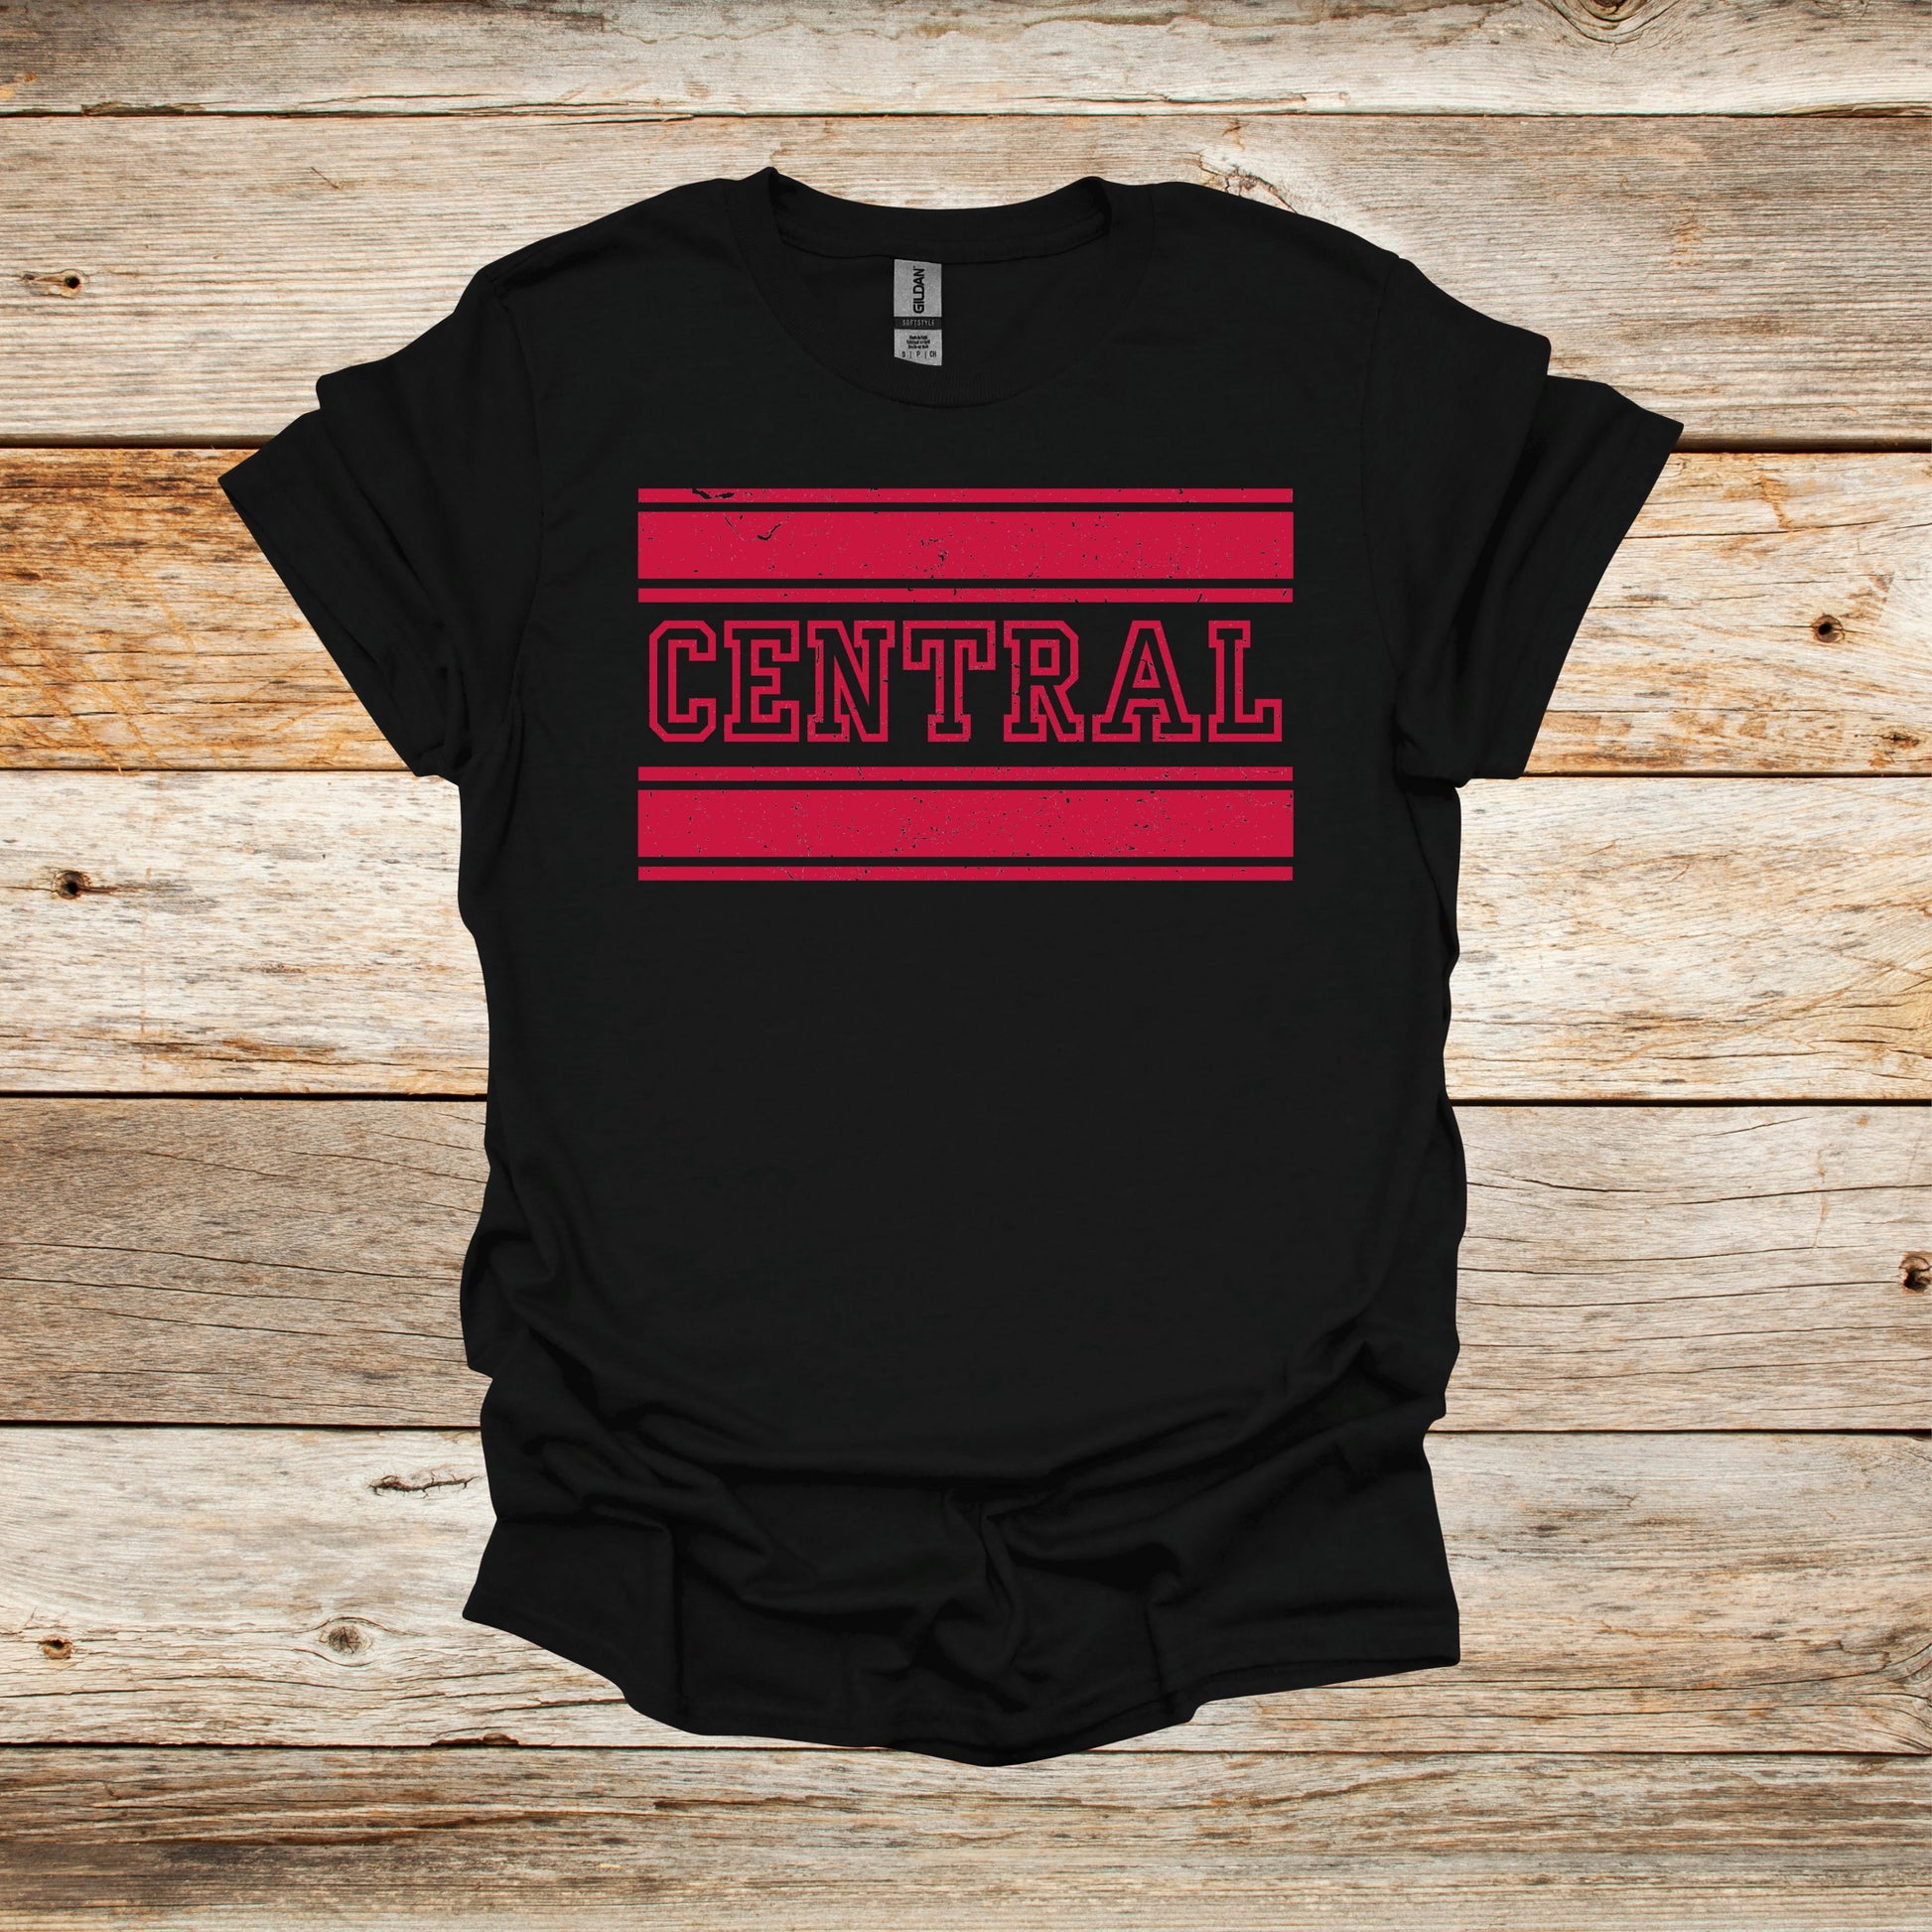 College T Shirt - University of Central Missouri Mules - Adult and Children's Tee Shirts T-Shirts Graphic Avenue Black Adult Small 